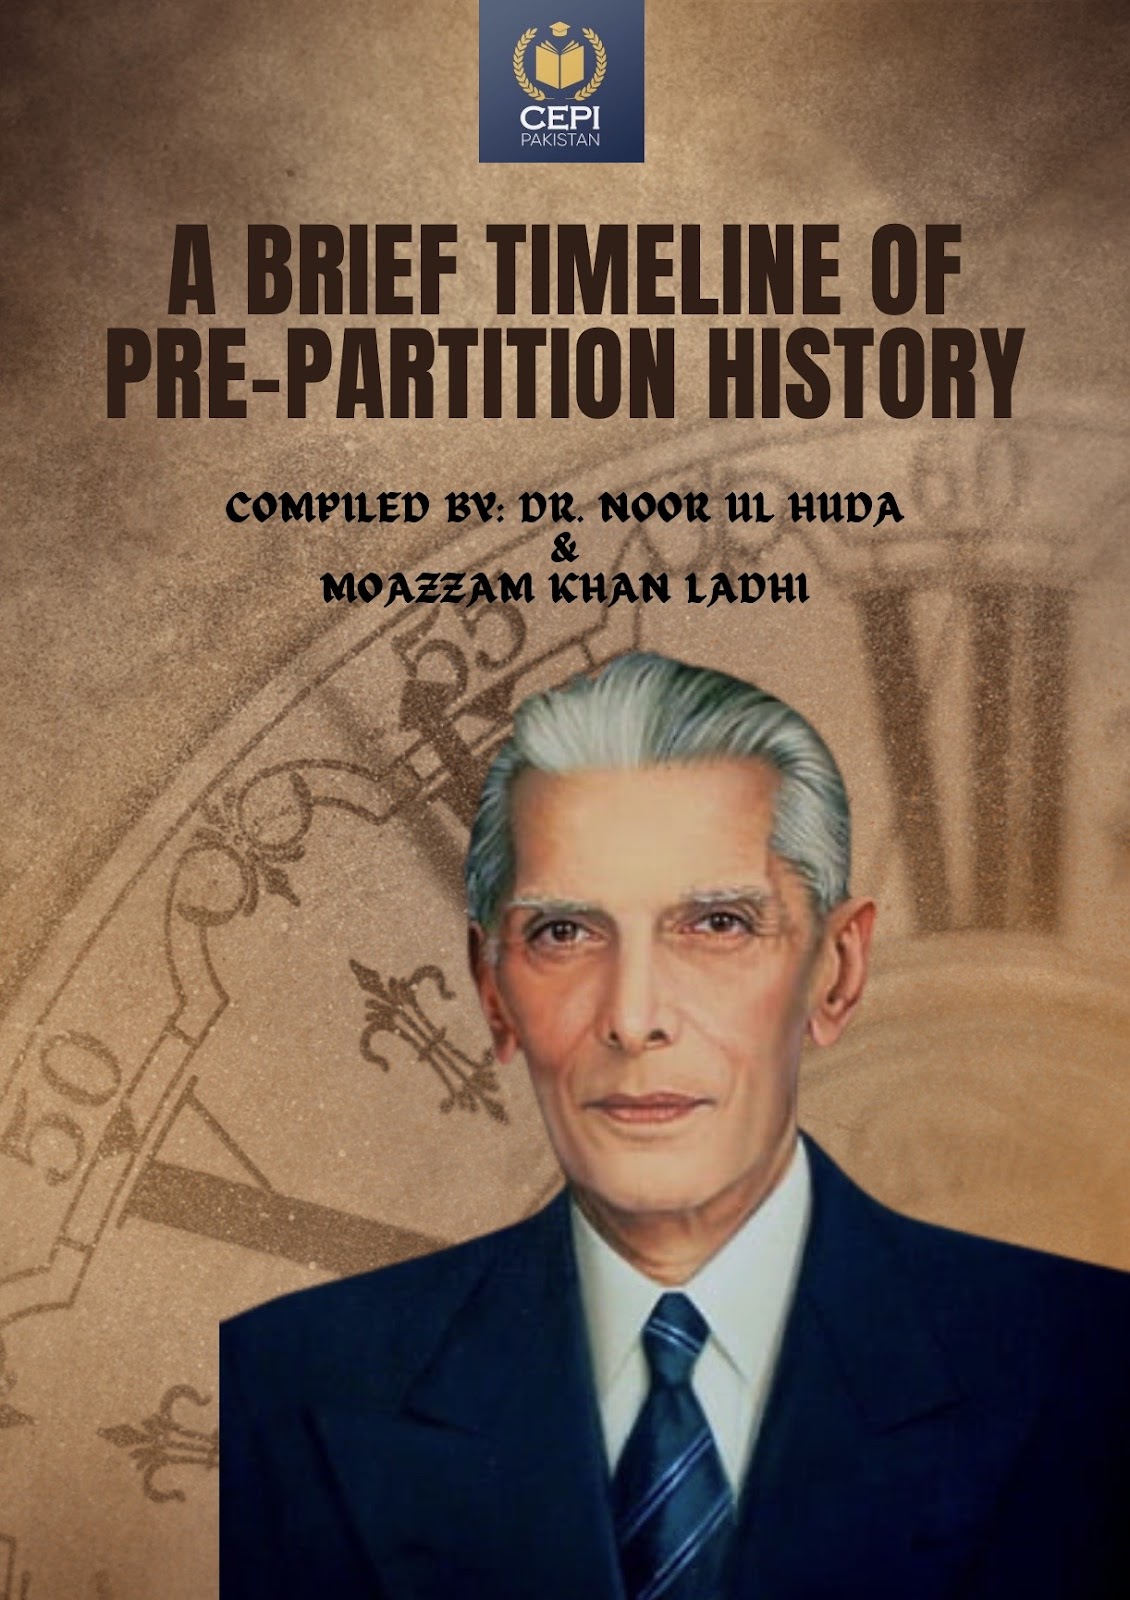 CG4-5 Timeline of Pre-Partition History By Dr. Noor ul Huda & Sir Moazzam Lodhi